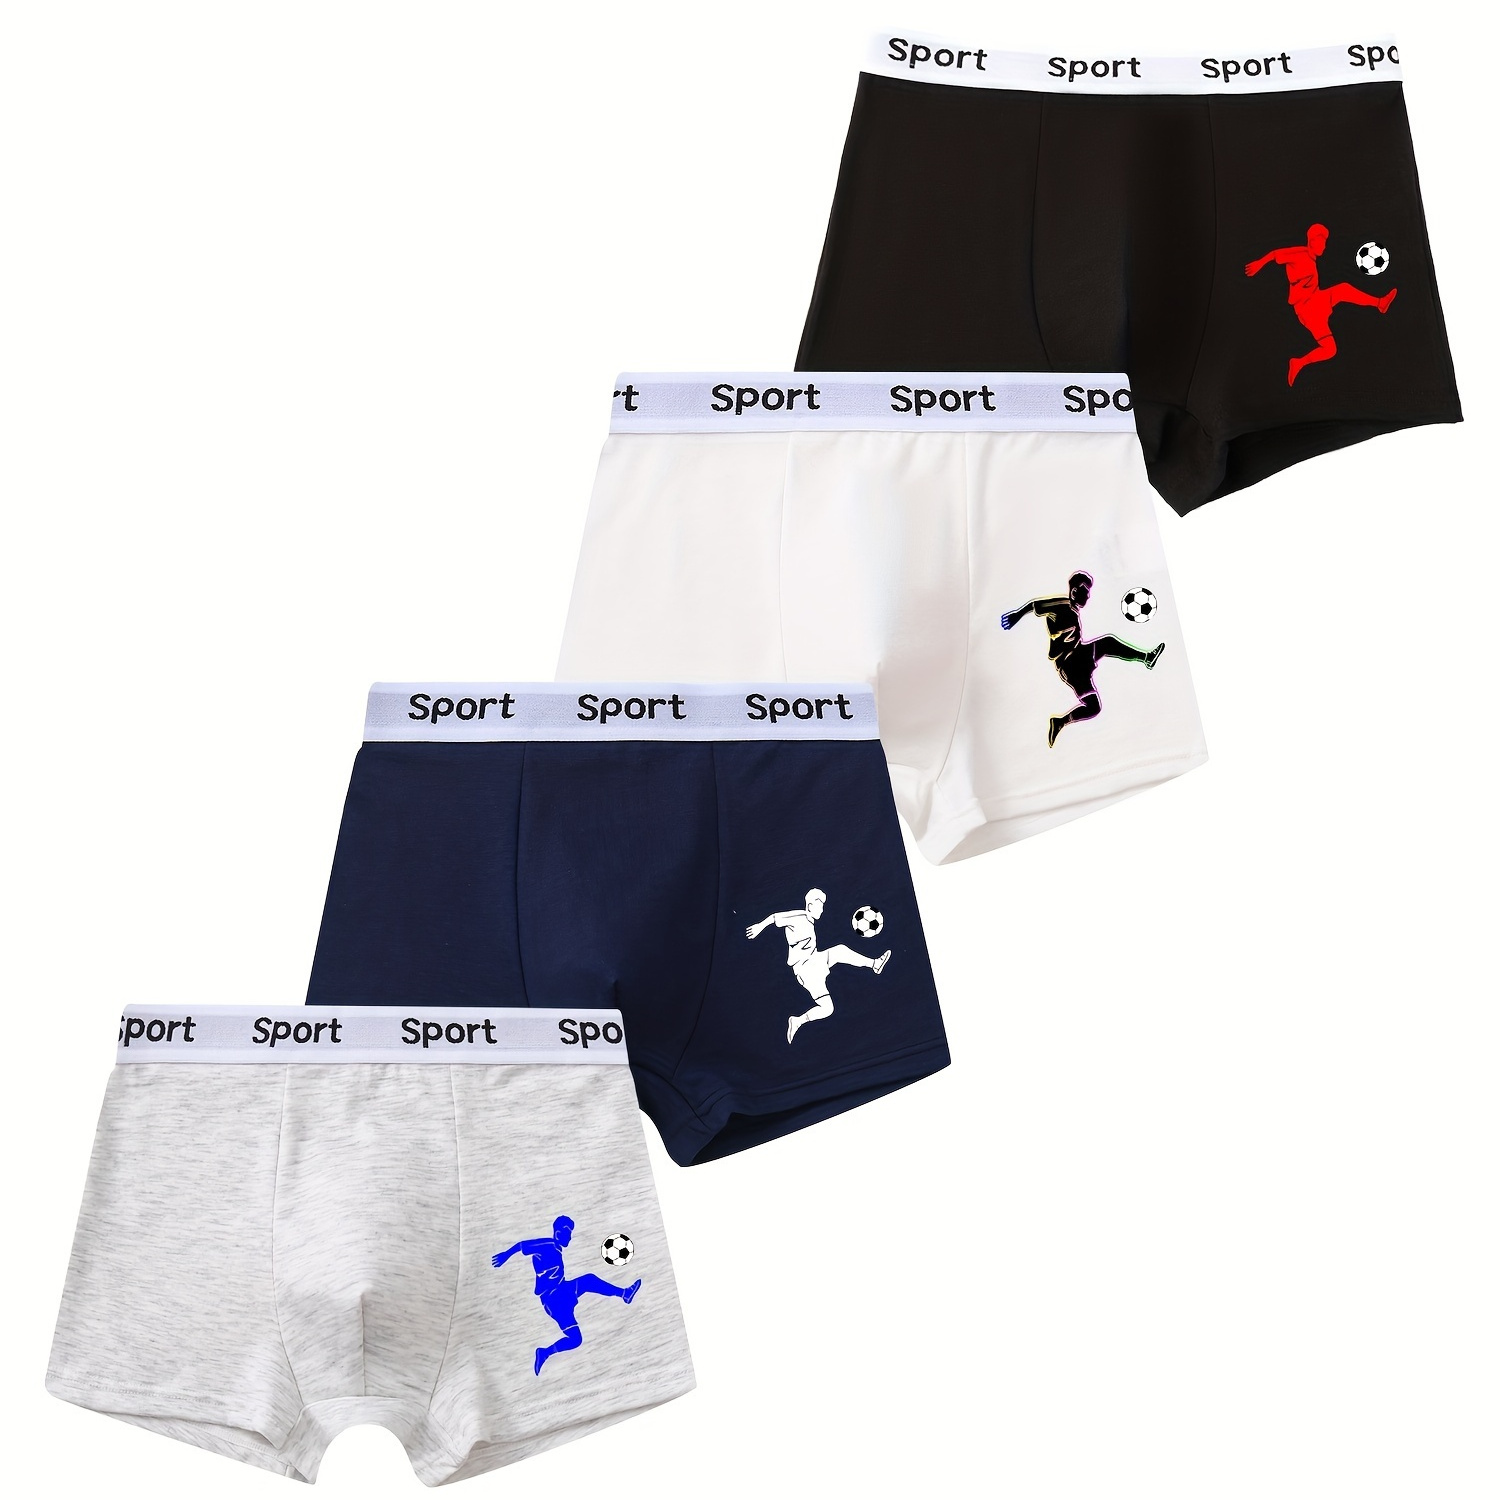 

4pcs Mixed Boys Briefs, Junior Sports Shorts, Solid Color Fashion Print Football Boxer Briefs, 95% Cotton, Sweatshirt And Breathable